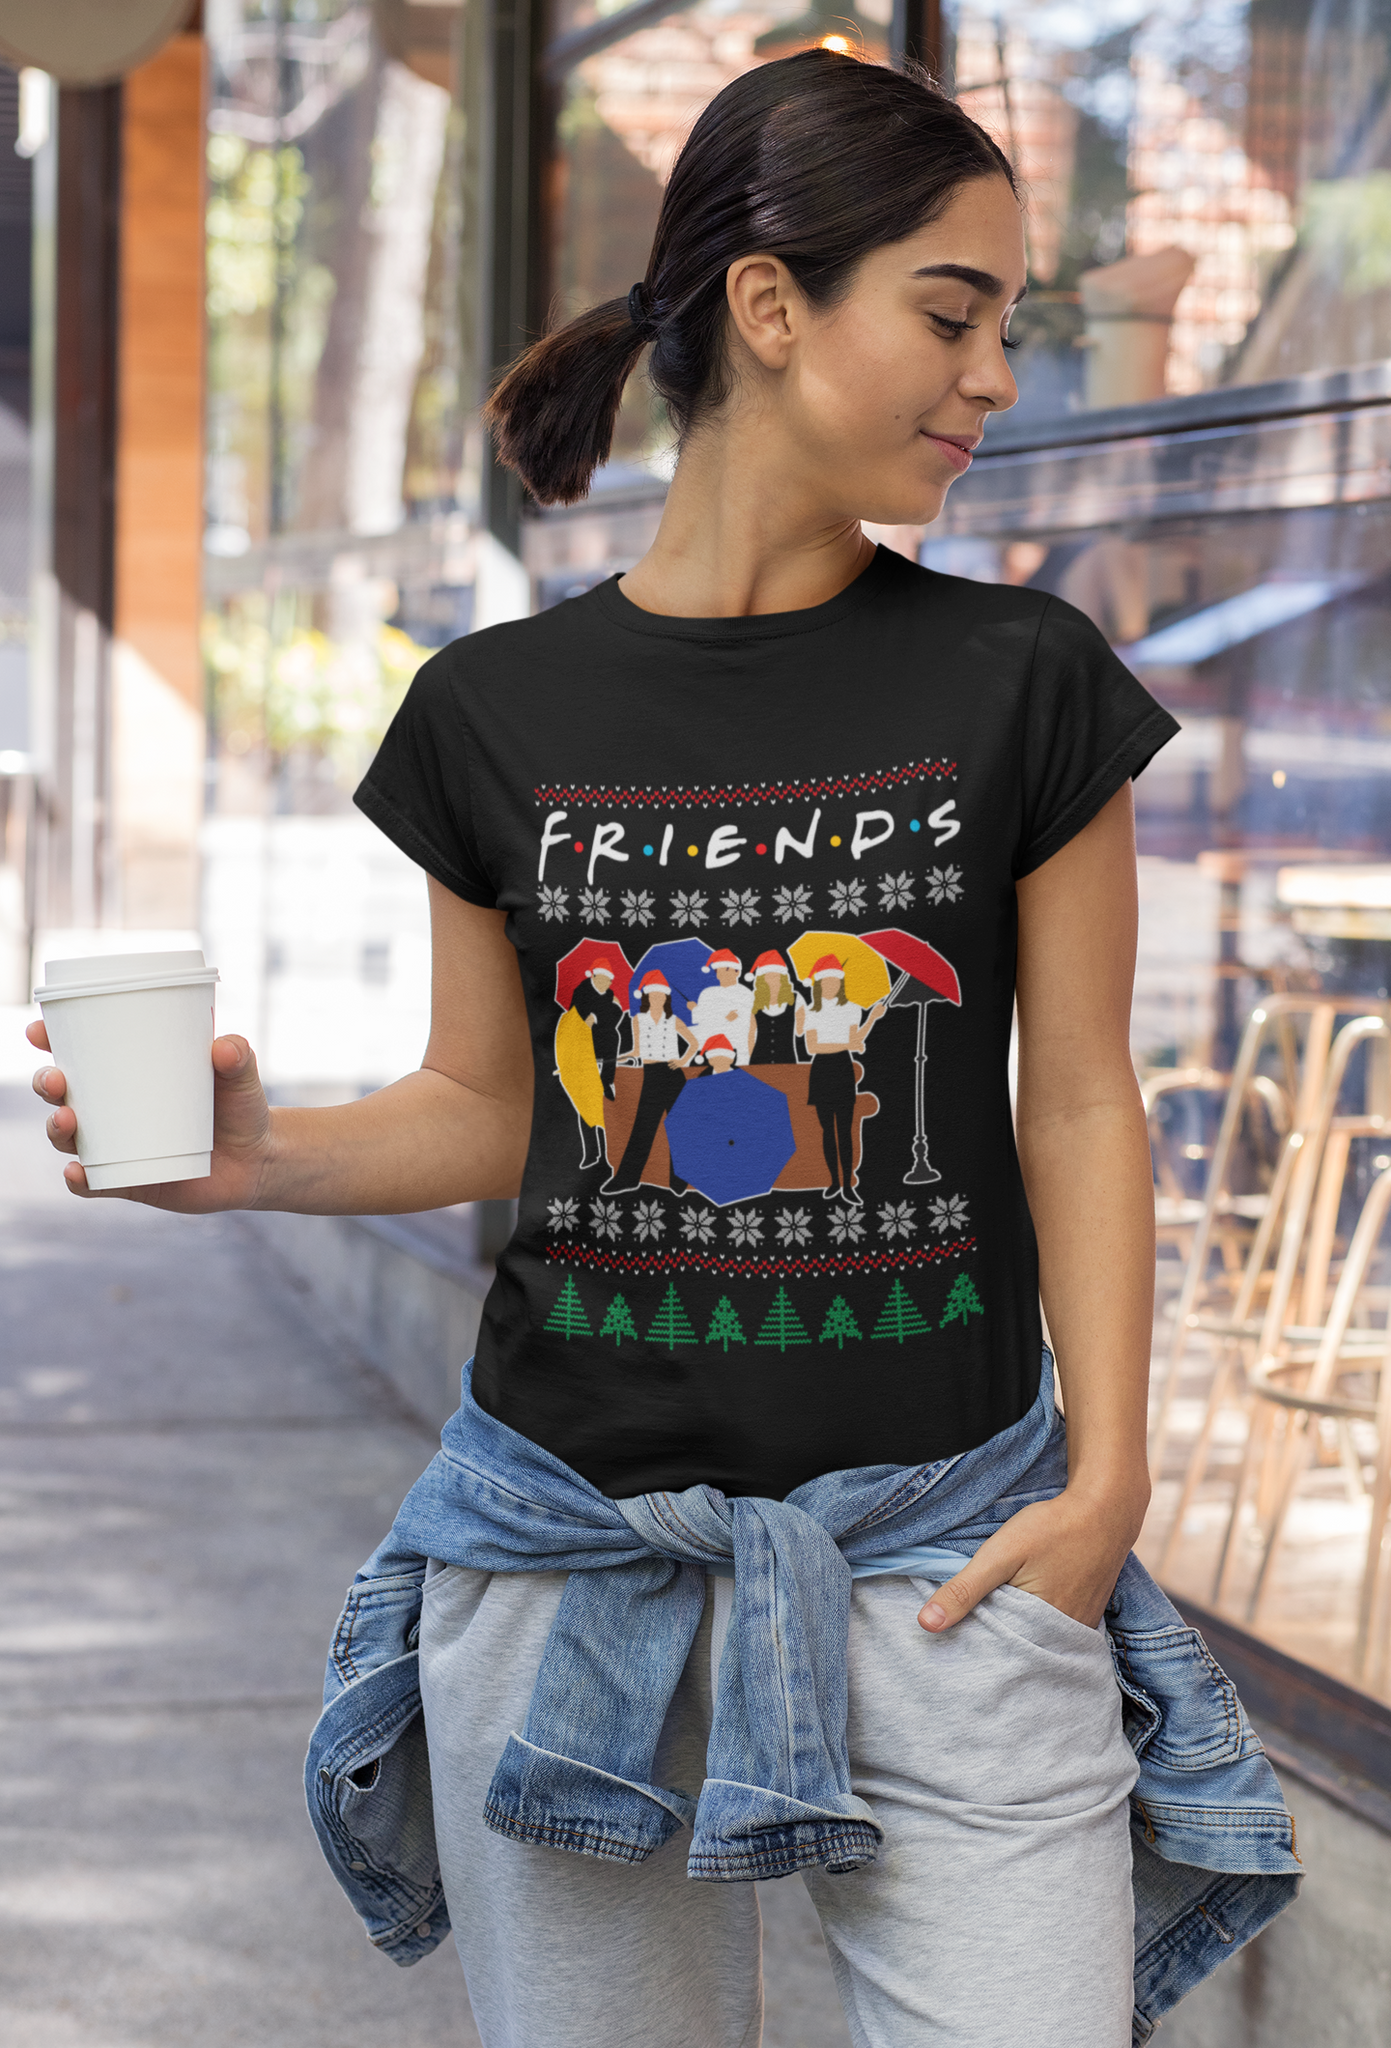 Friends TV Show Ugly Sweater T Shirt, Friends Characters T Shirt, Christmas Gifts